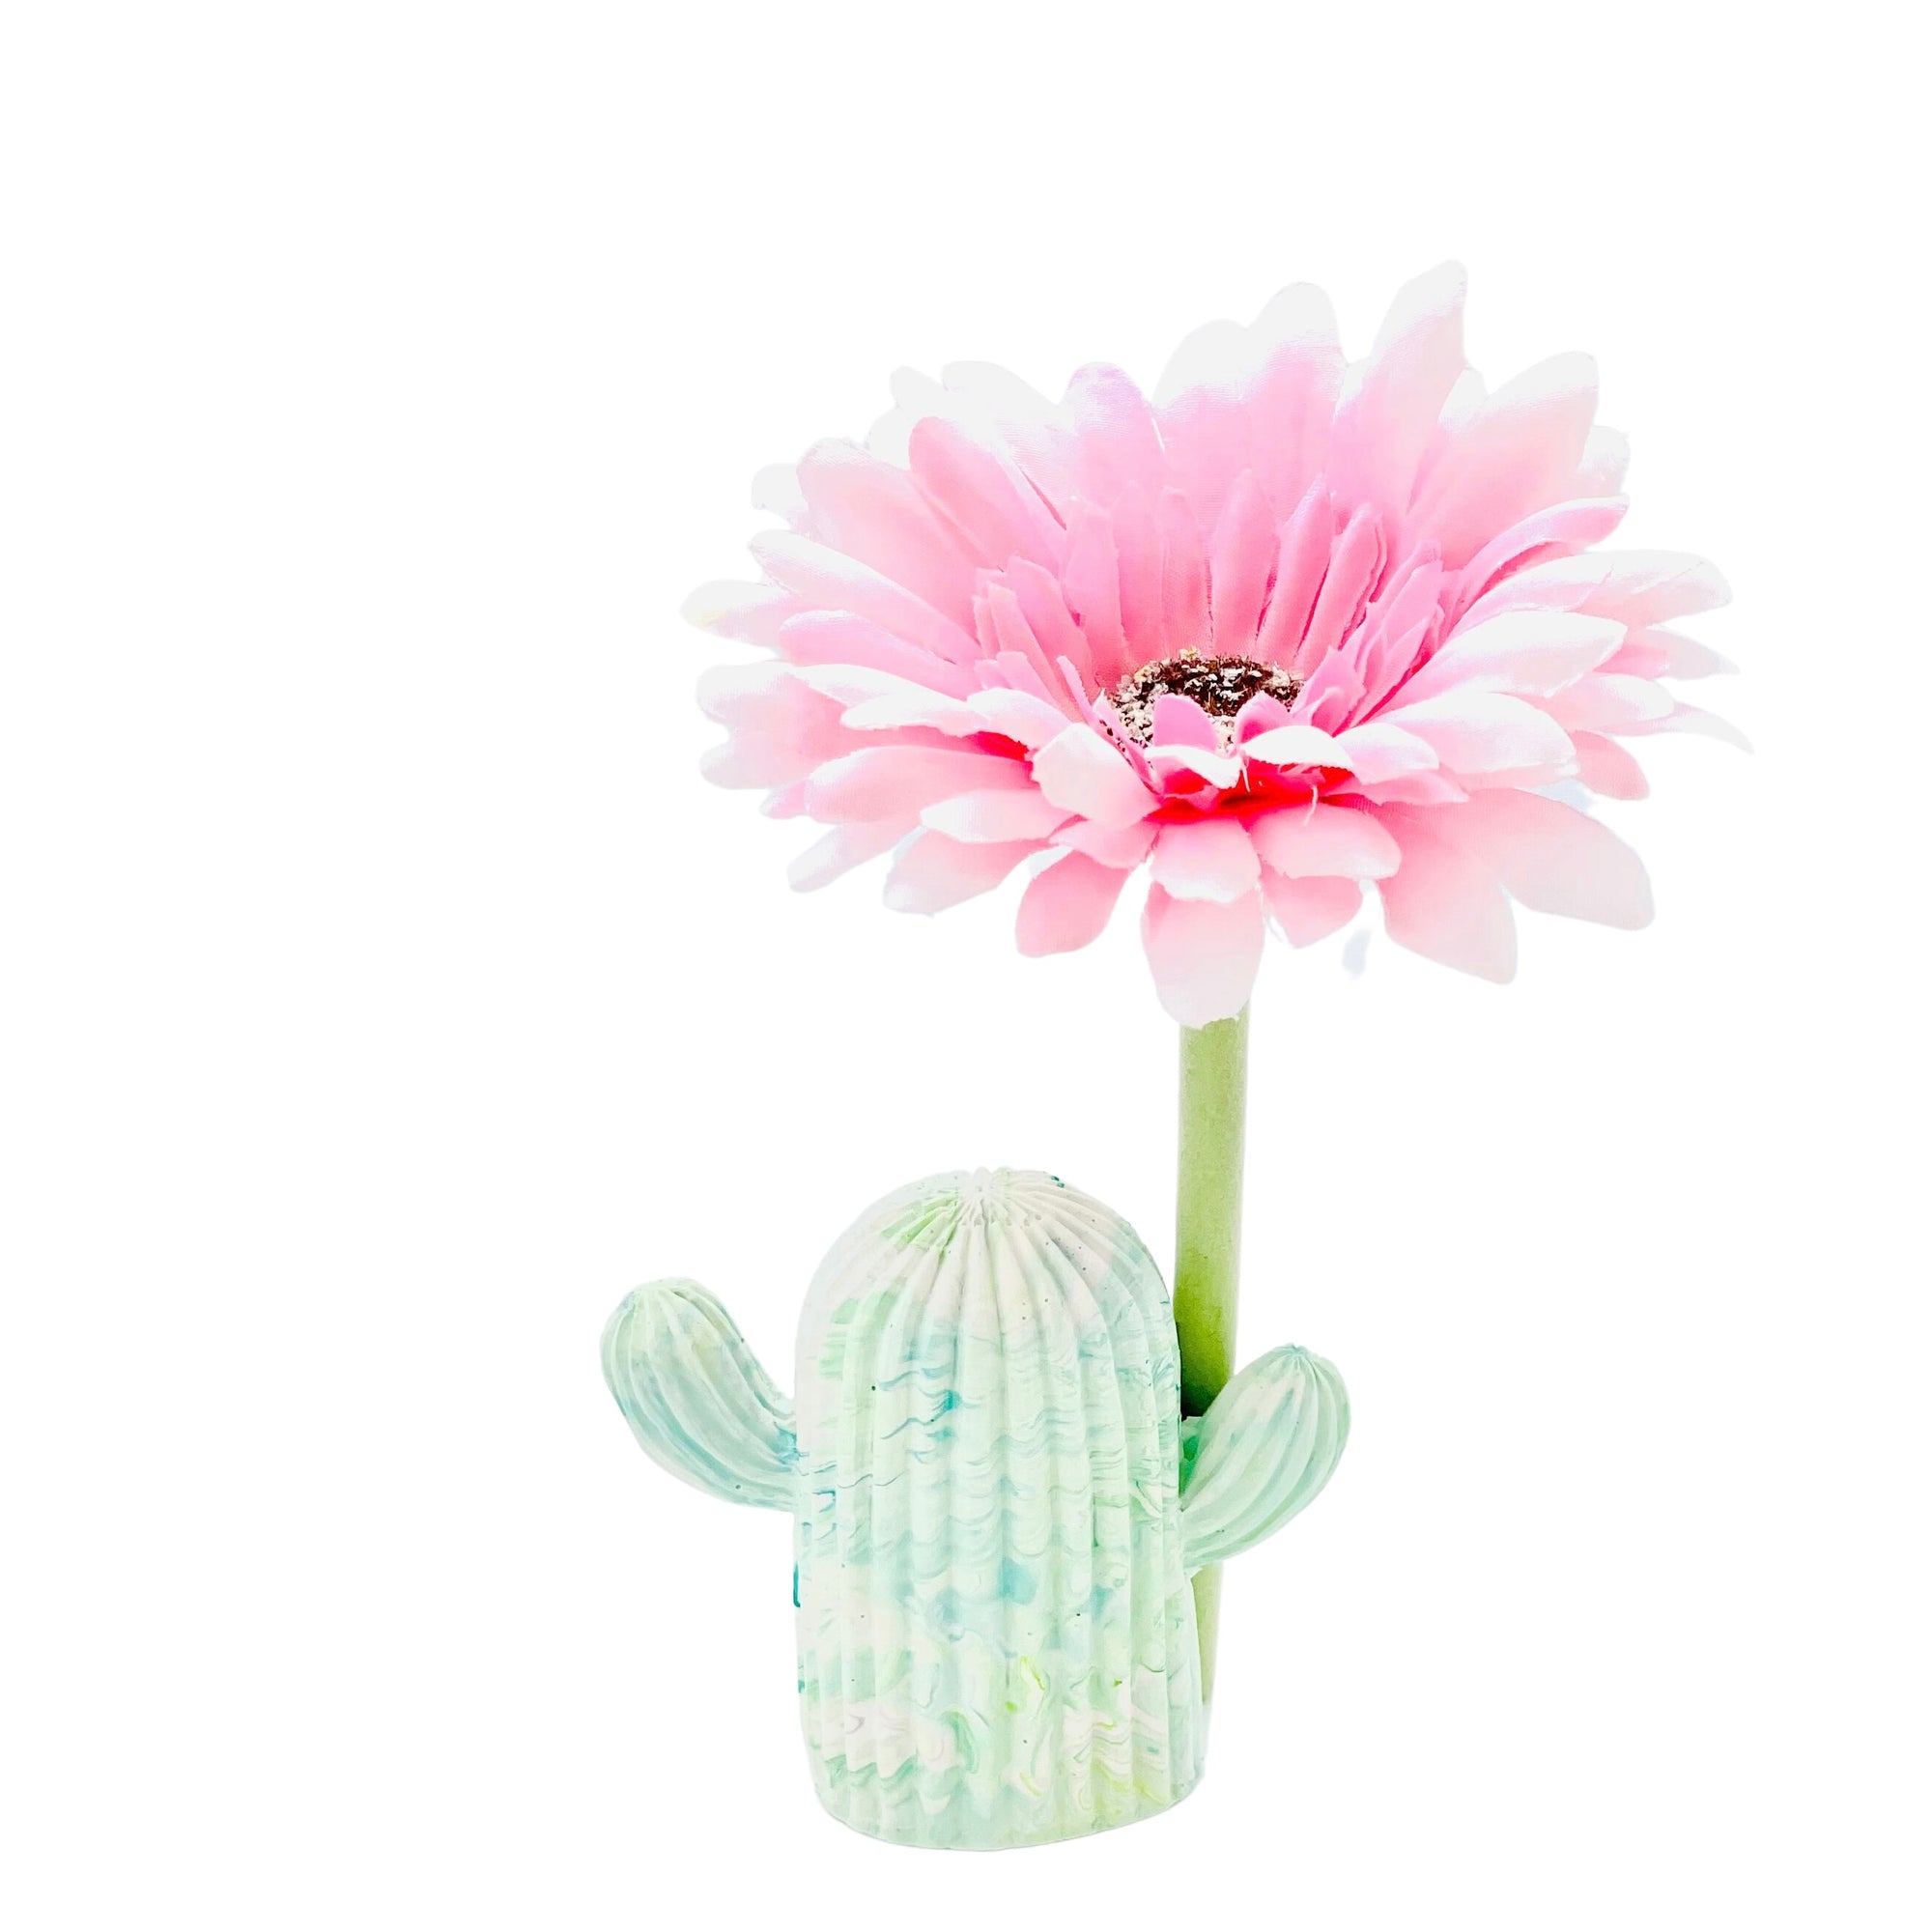 A medium size Jesmonite cactus measuring 7.5cm tall marbled with turquoise and green pigment.